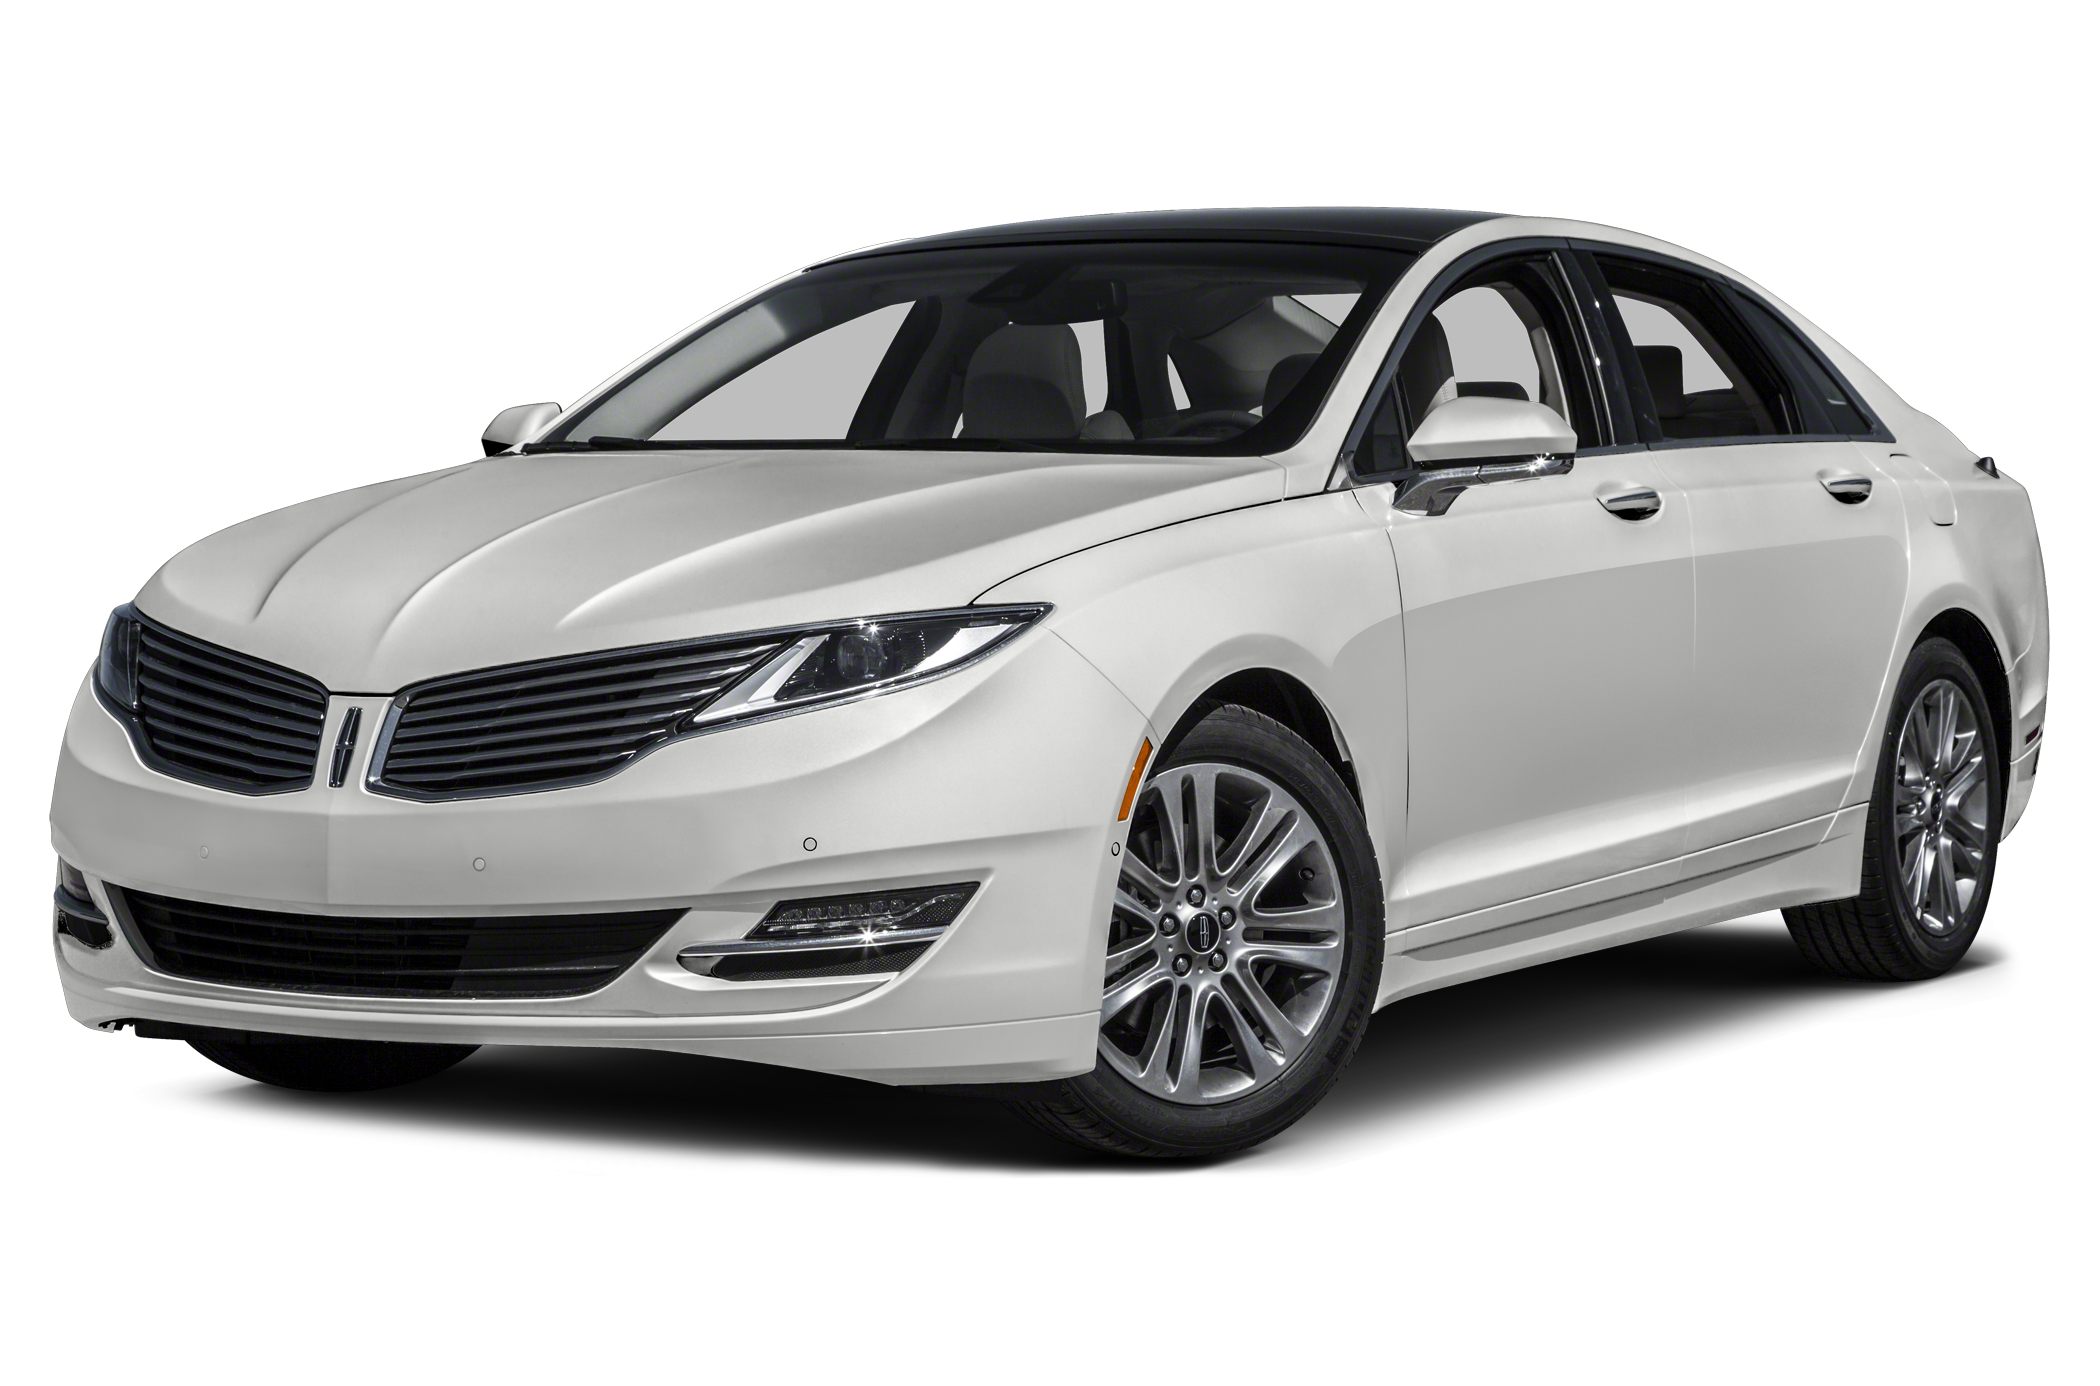 lincoln-dealers-frustrated-over-slow-mkz-production-ramp-up-autoblog